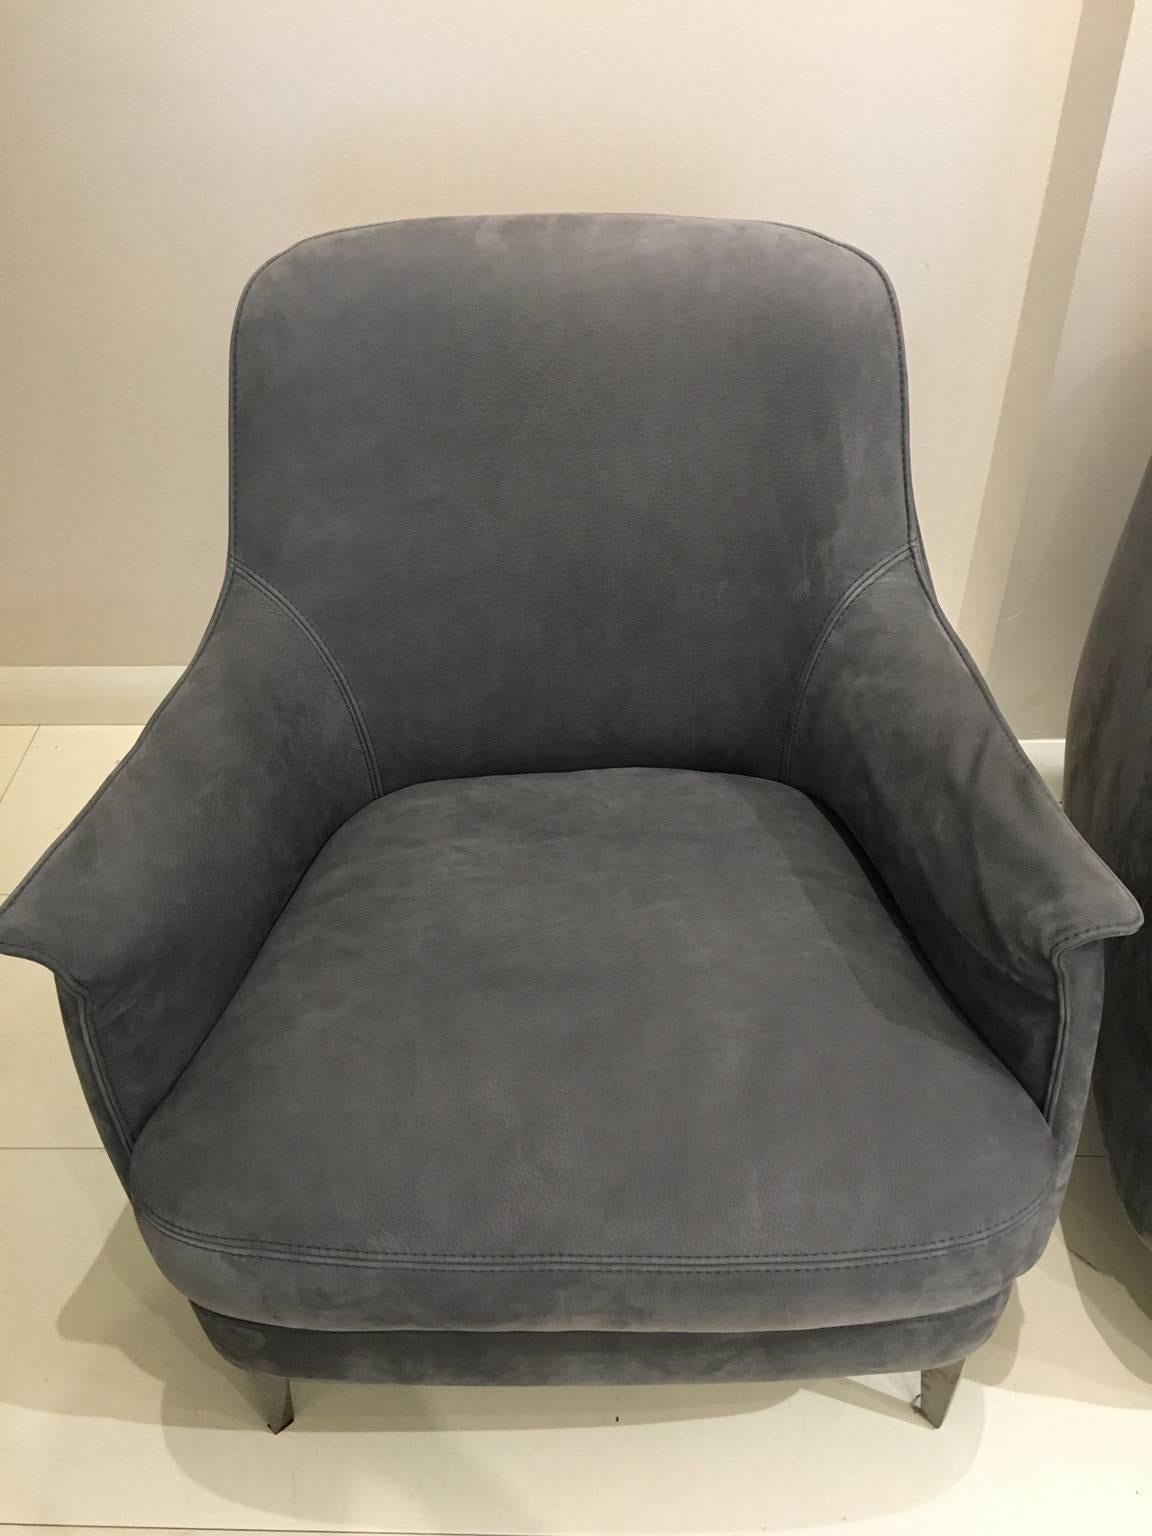 The design of this model successfully combines the elegance of the past with modern inspirations in order to offer a comfortable and classy armchair - suitable for the most elegant environments.
Its harmonious lines provide safe and comfortable